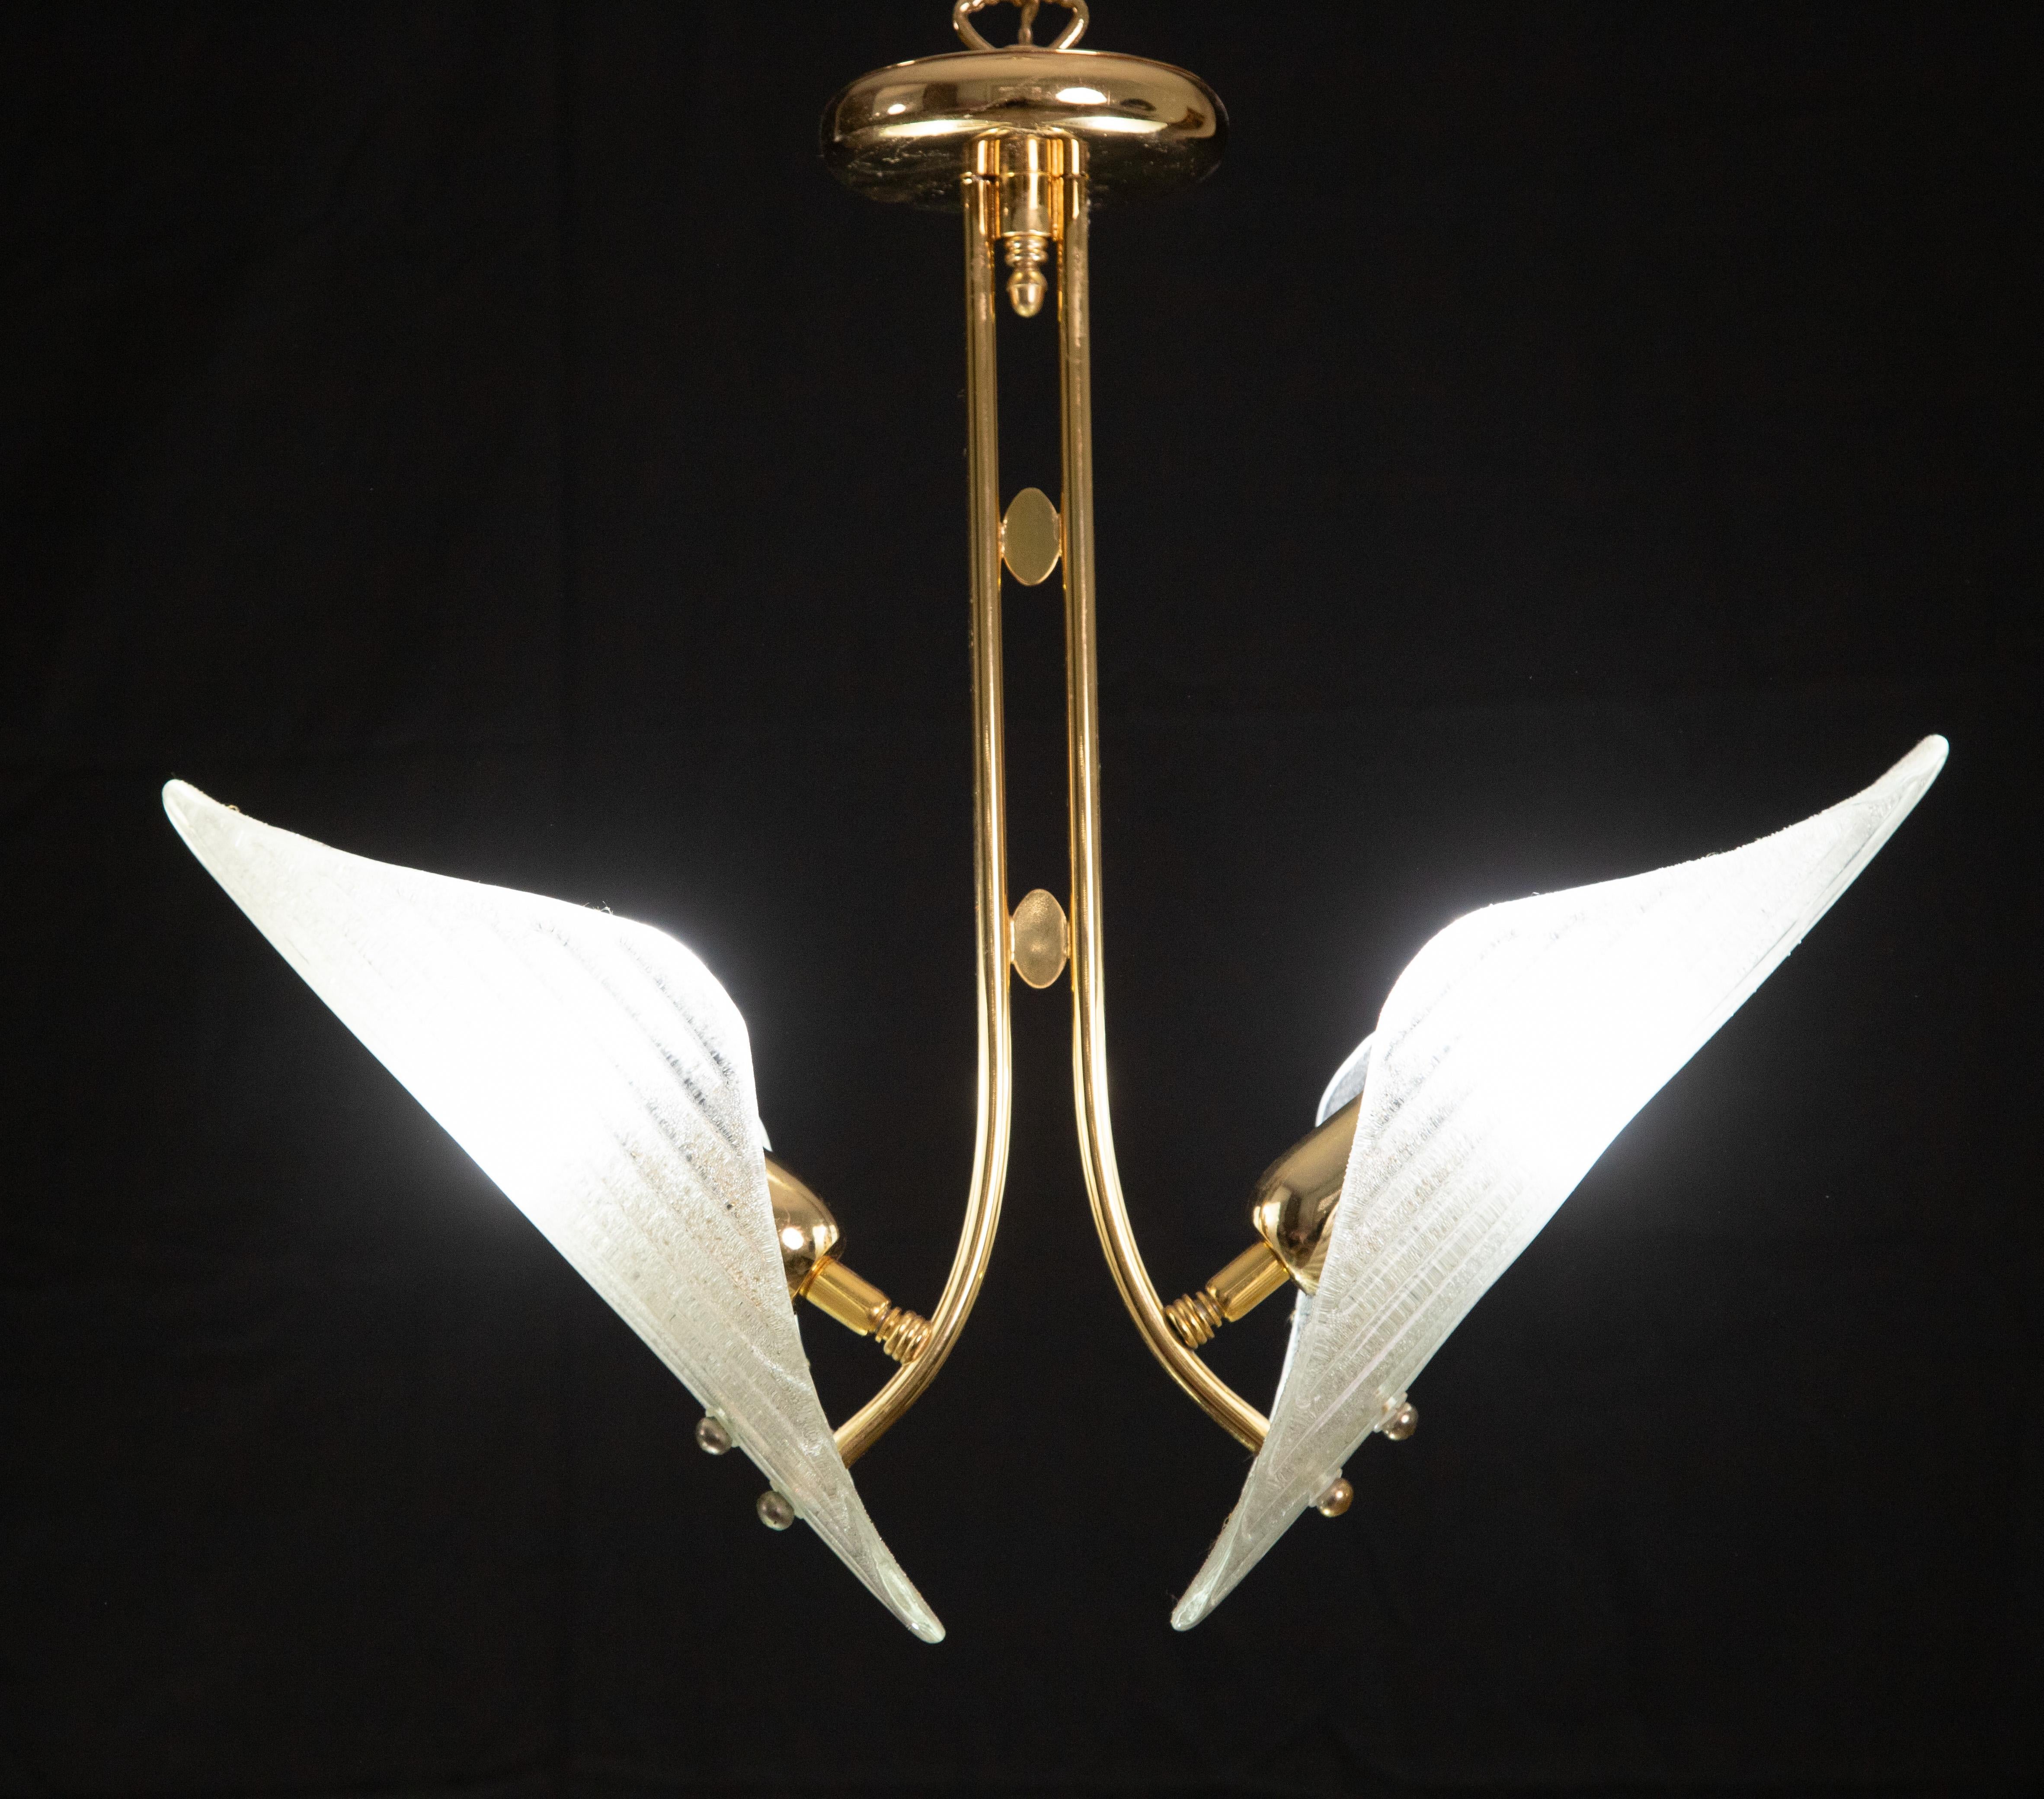 Murano chandelier in the style of Franco Luce.

1970s era.

Gold bath frame.

Excellent vintage condition.